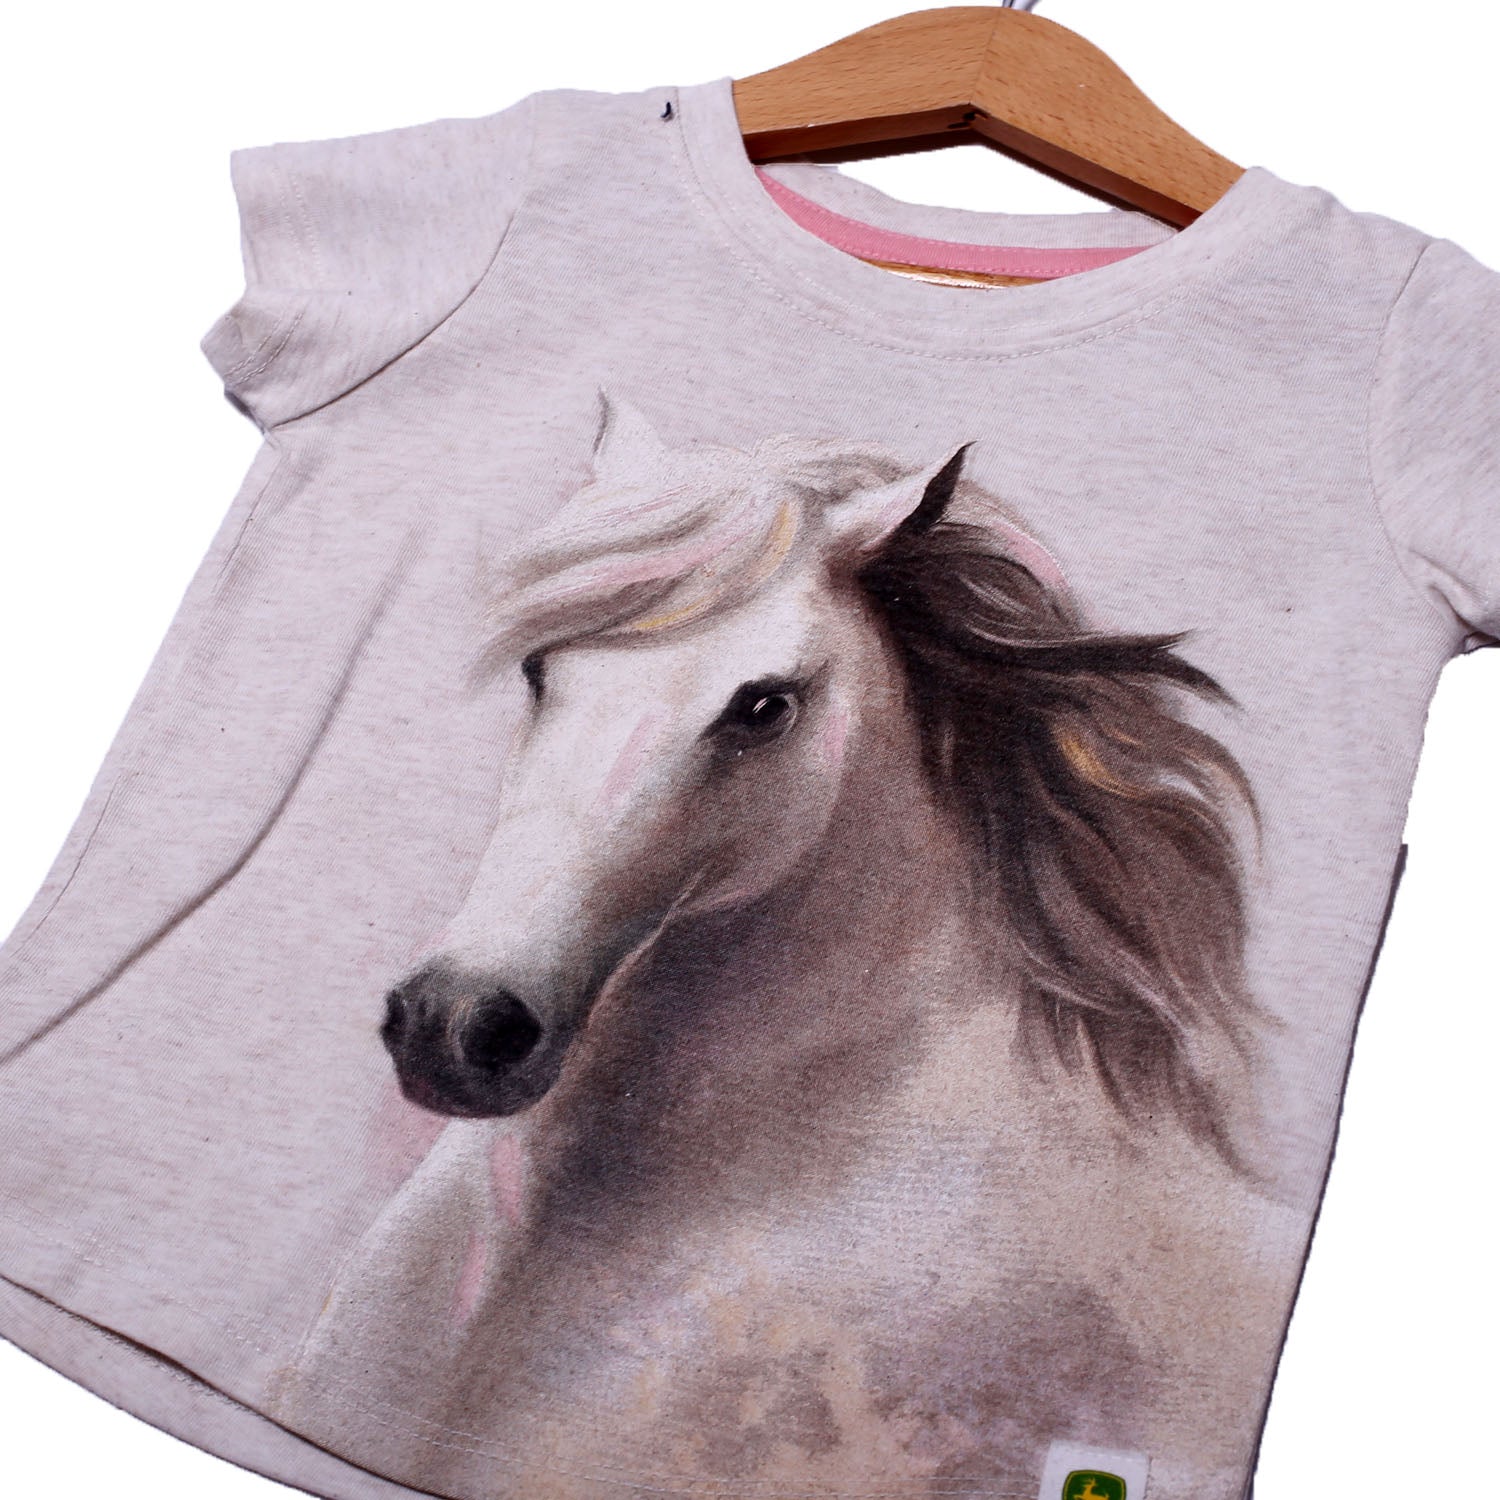 NEW OFF WHITE HORSE PRINTED T-SHIRT